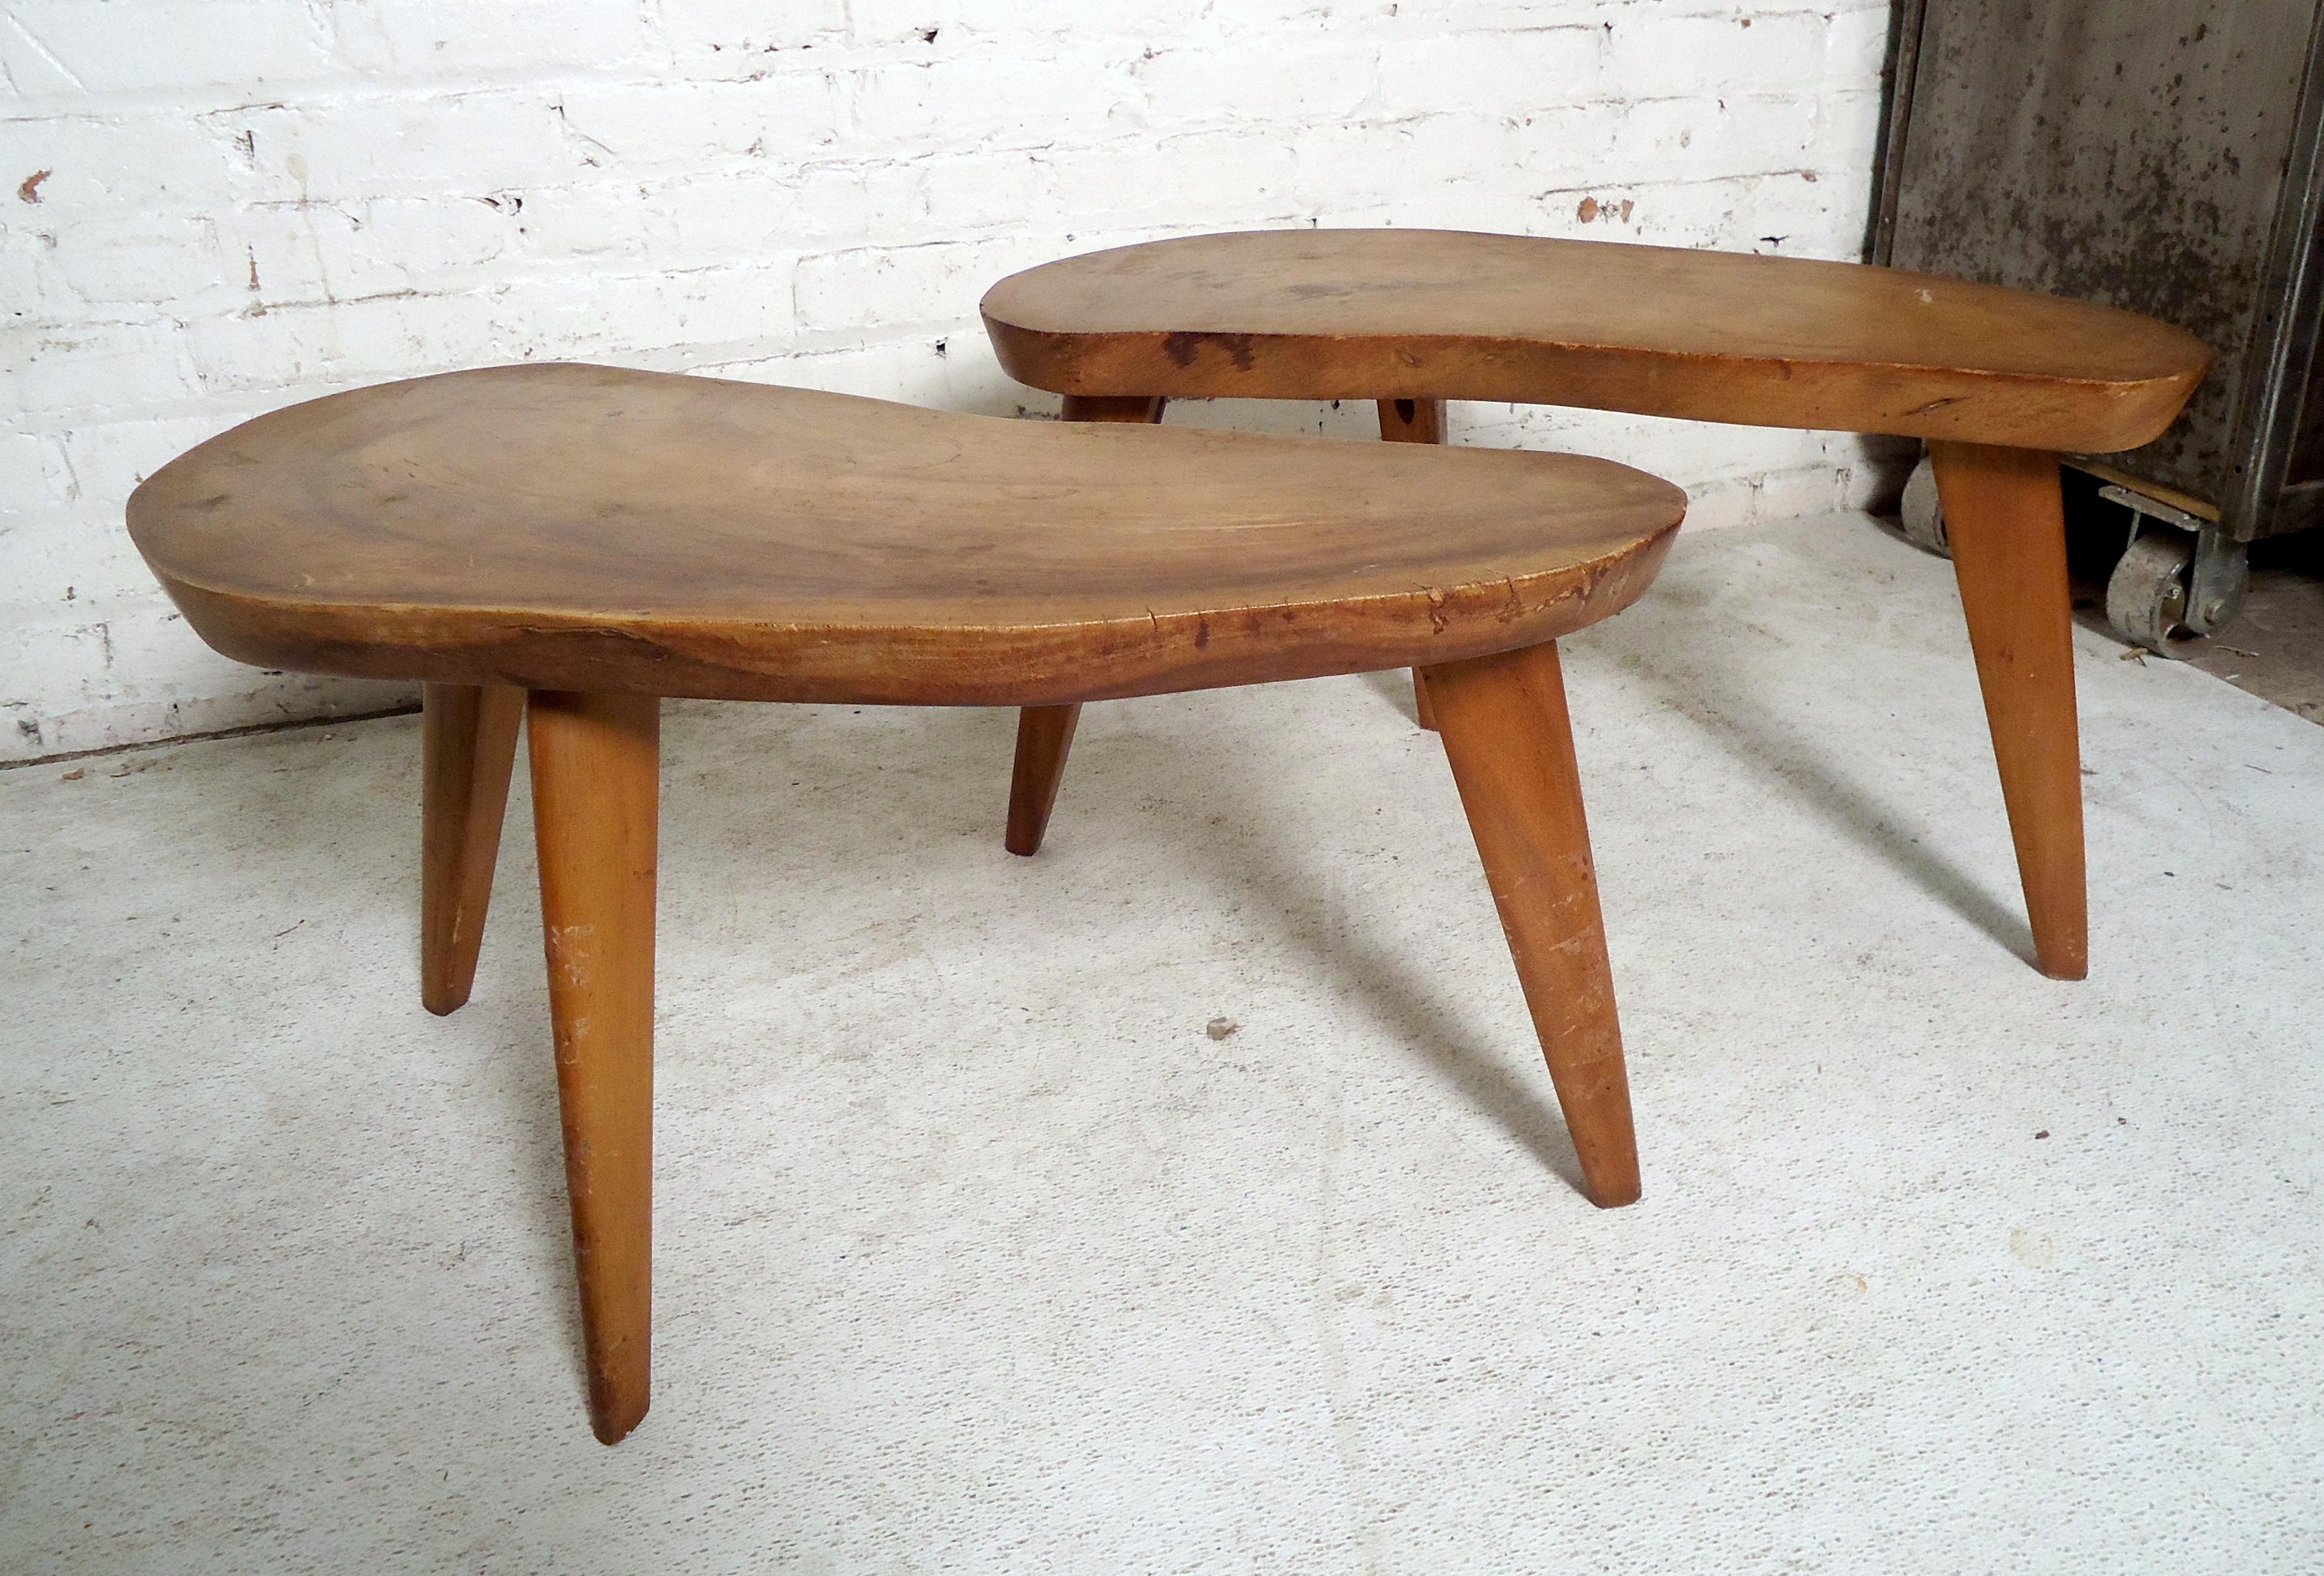 Pair of vintage modern live edge side tables featured on three sturdy legs. These tables would make a great addition to any home.

Please confirm item location (NY or NJ) with dealer.